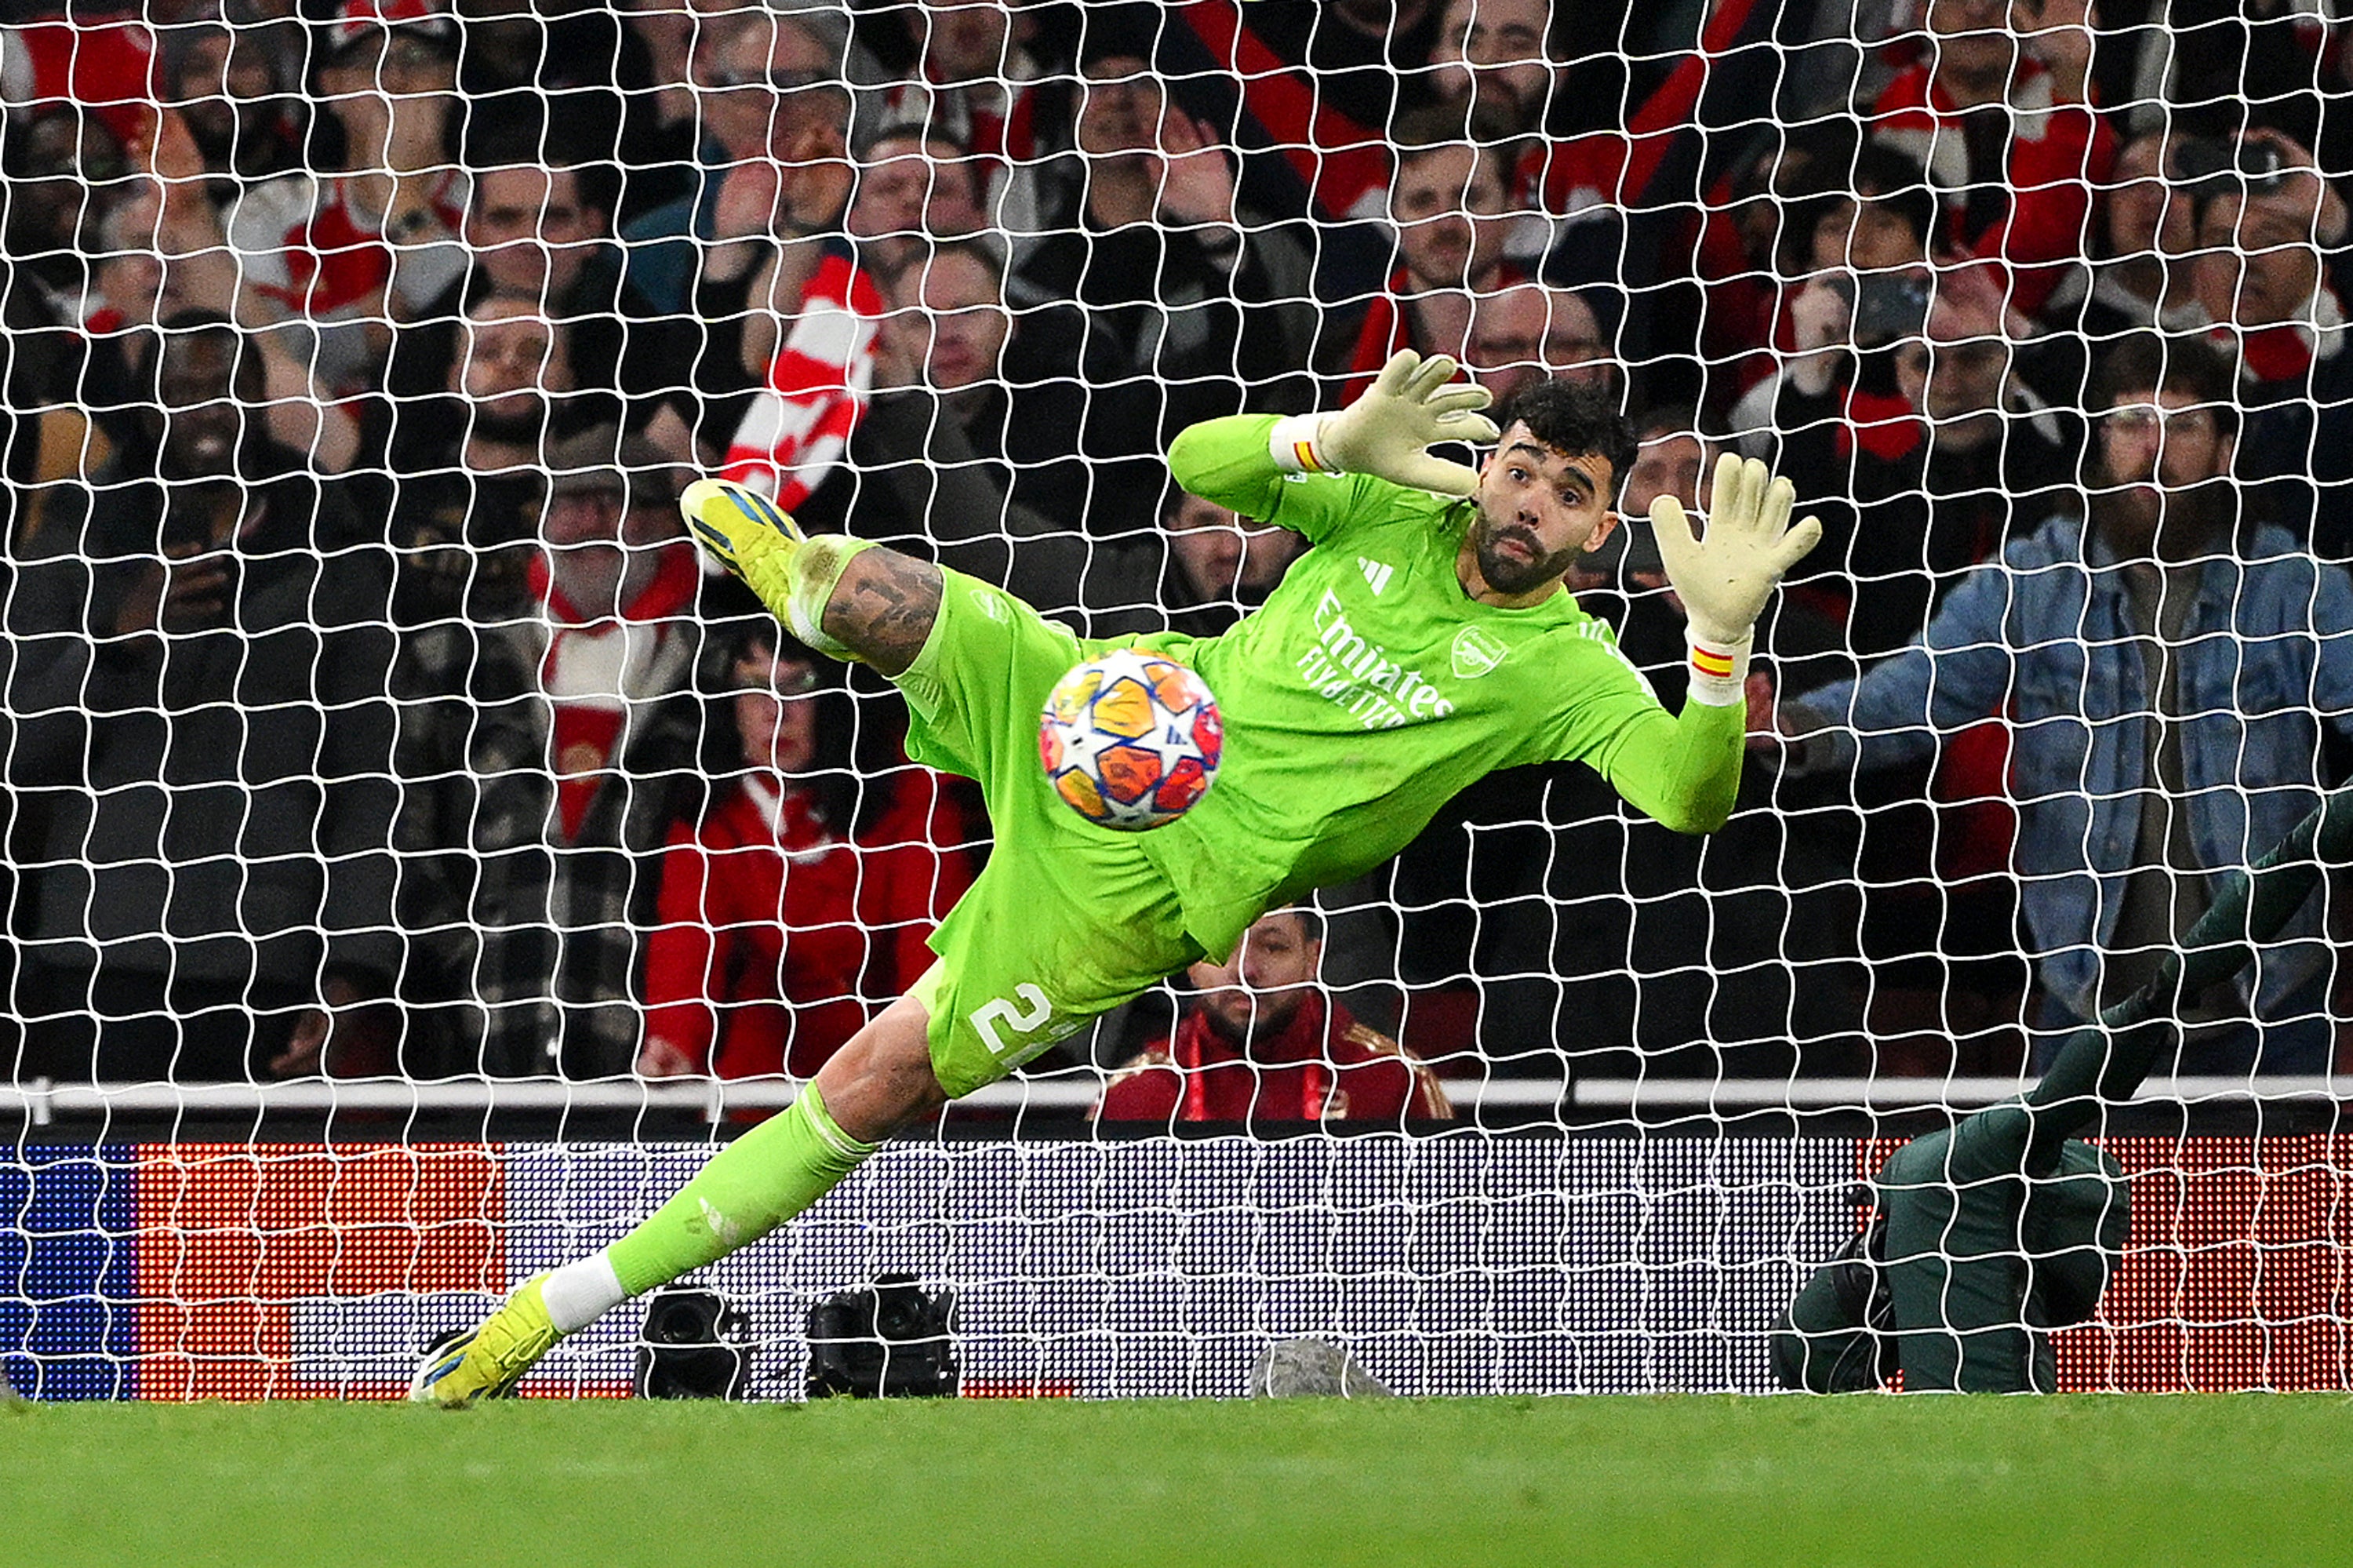 David Raya makes a crucial save to deny Galeno to secure Arsenal’s place in the next round